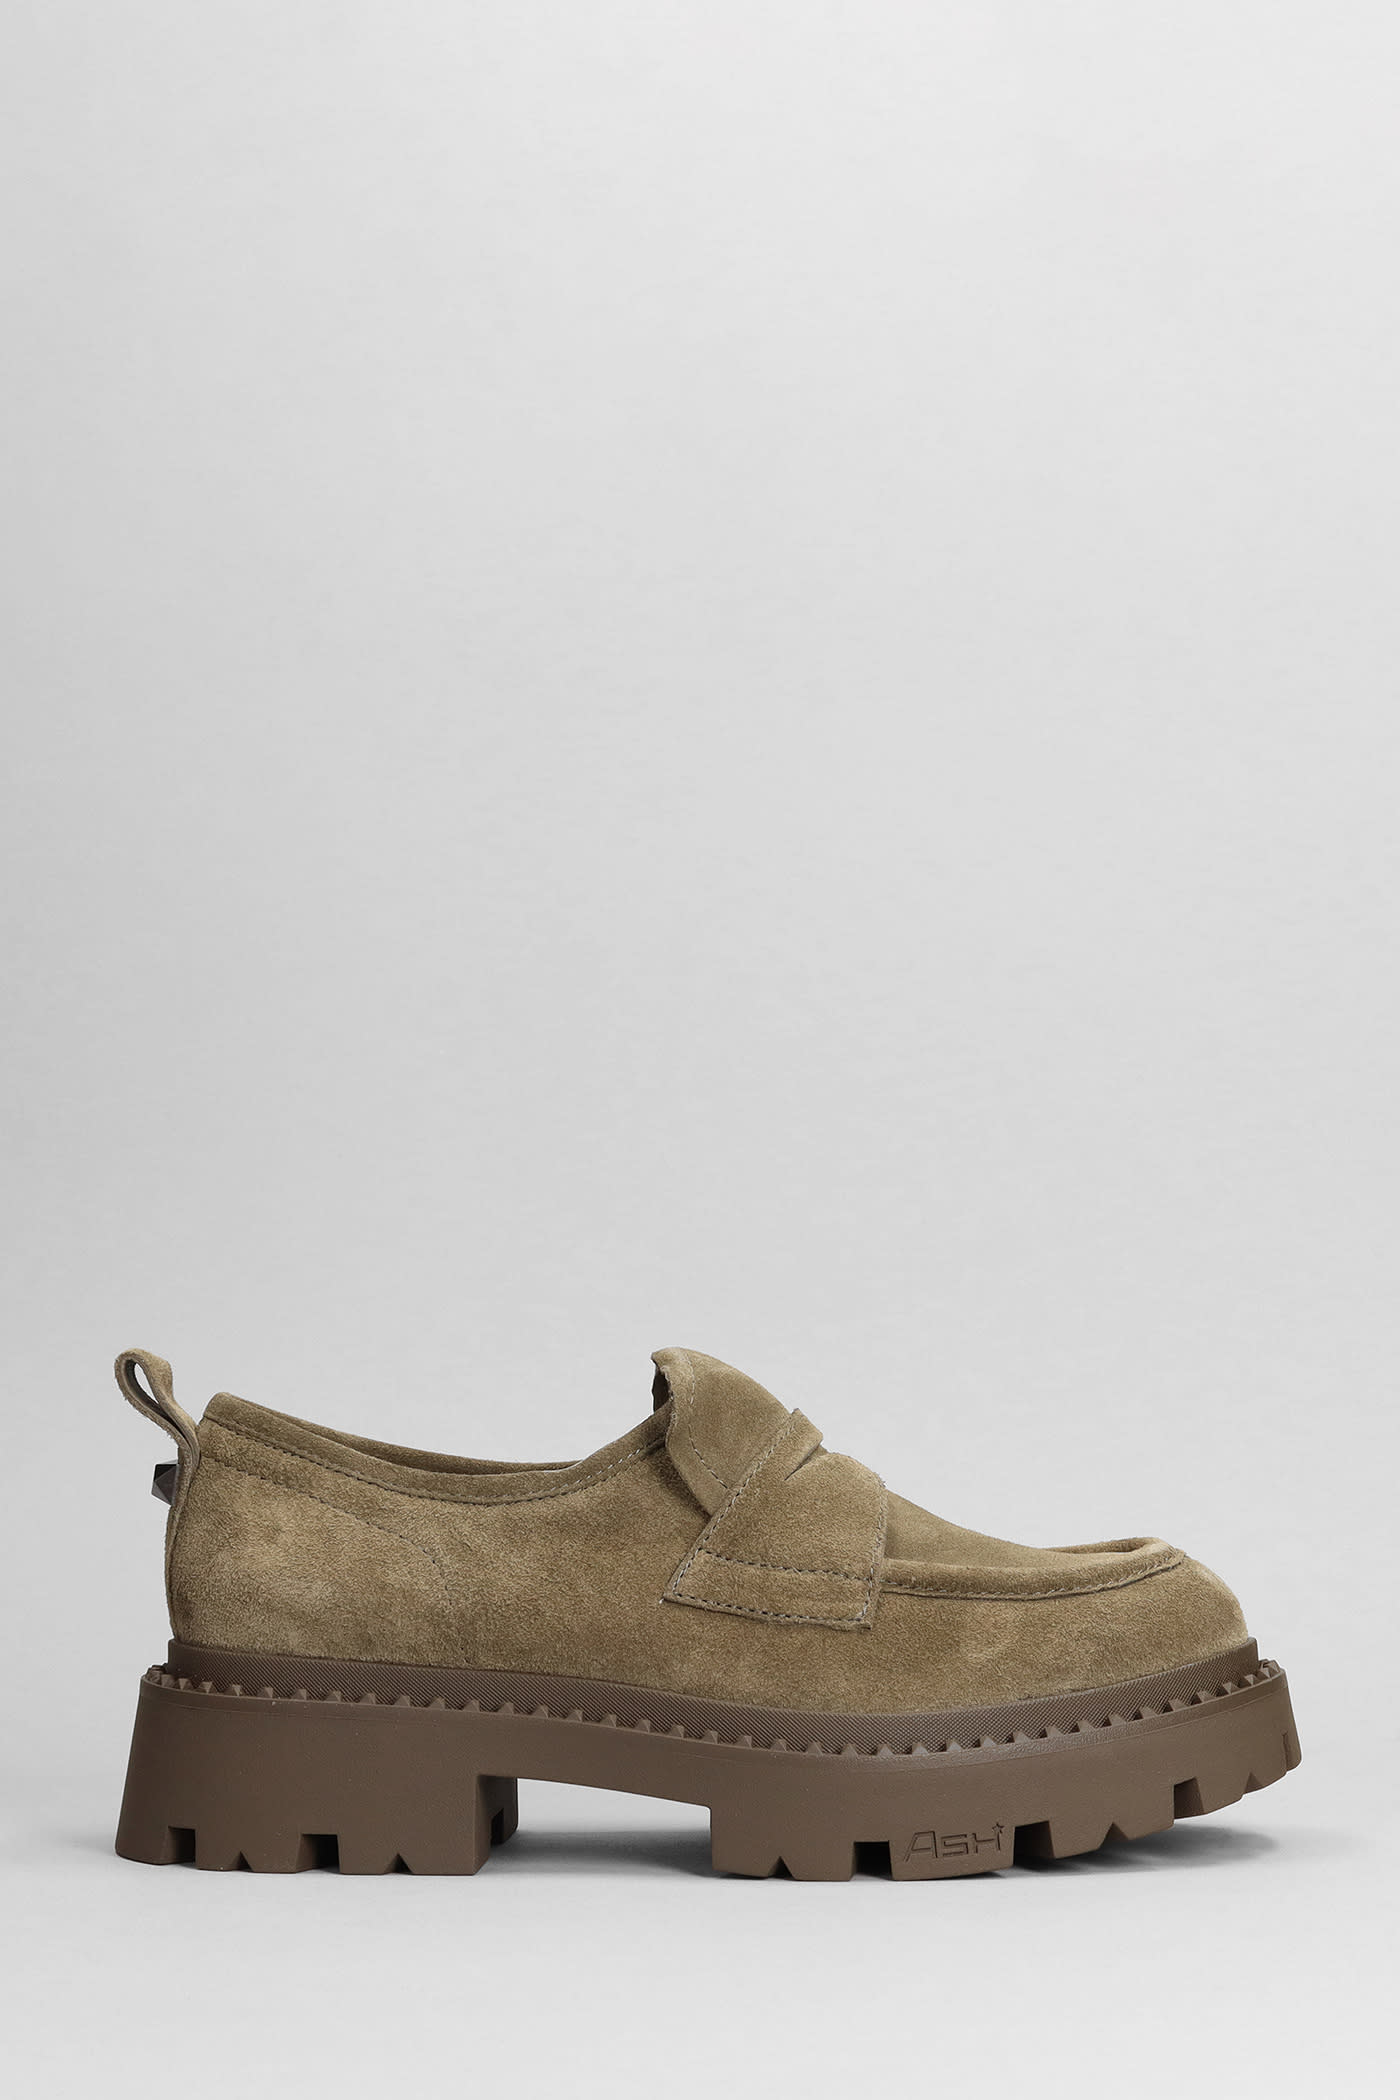 ASH GENIAL LOAFERS IN KHAKI SUEDE